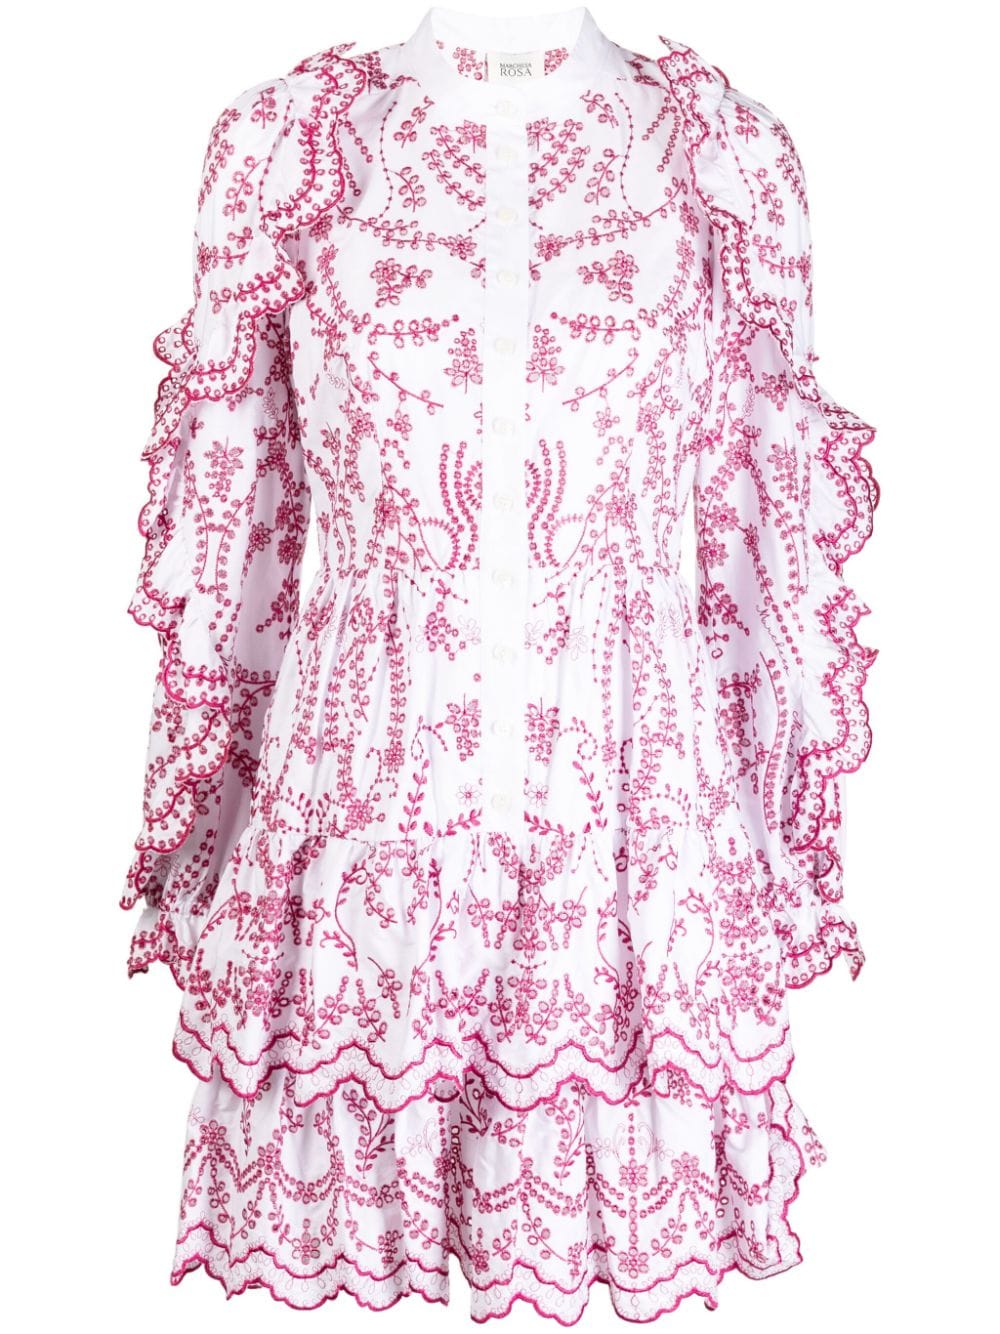 Altheda broderie-anglaise cotton minidress